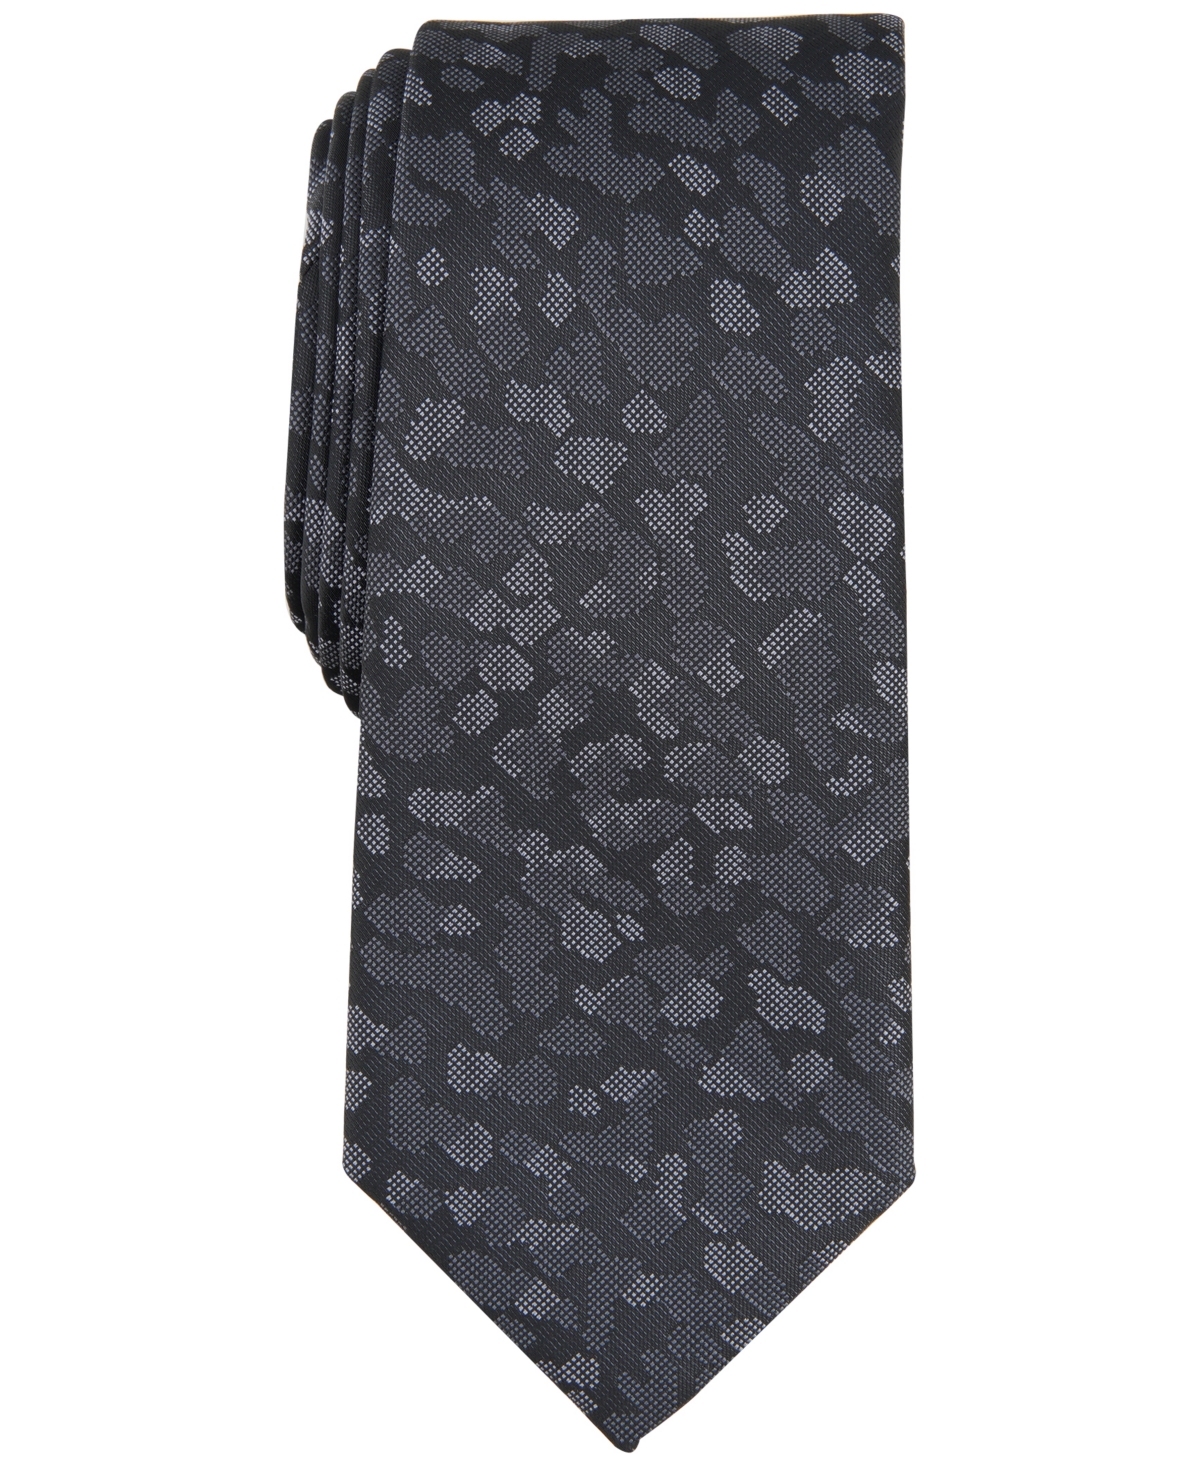 Men's Arleve Abstract Print Tie, Created for Macy's - Navy